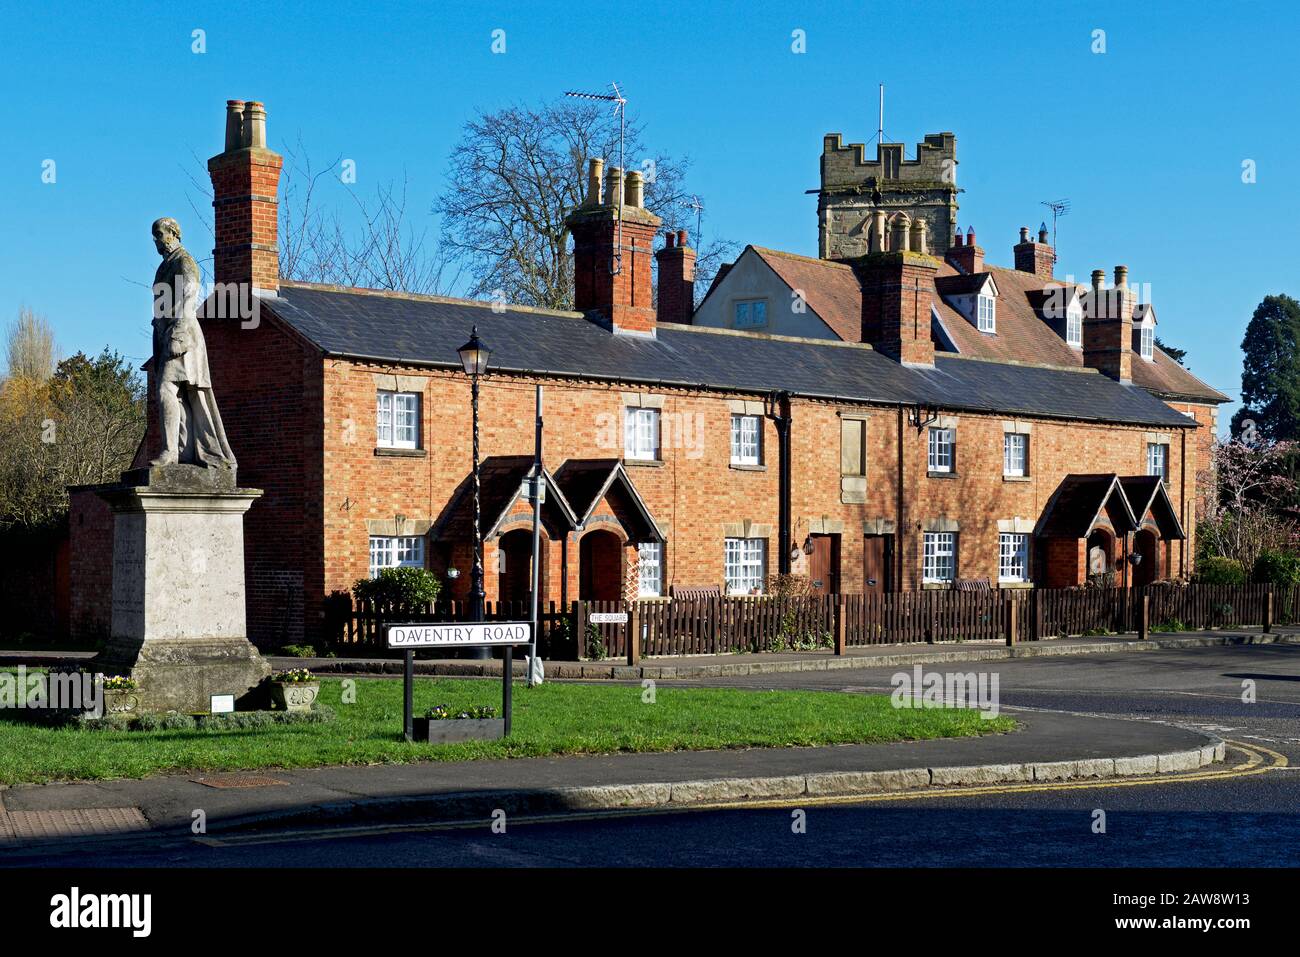 The Newcombe and Spier Almshouses in Dunchurch, Warwickshire, England UK Stock Photo